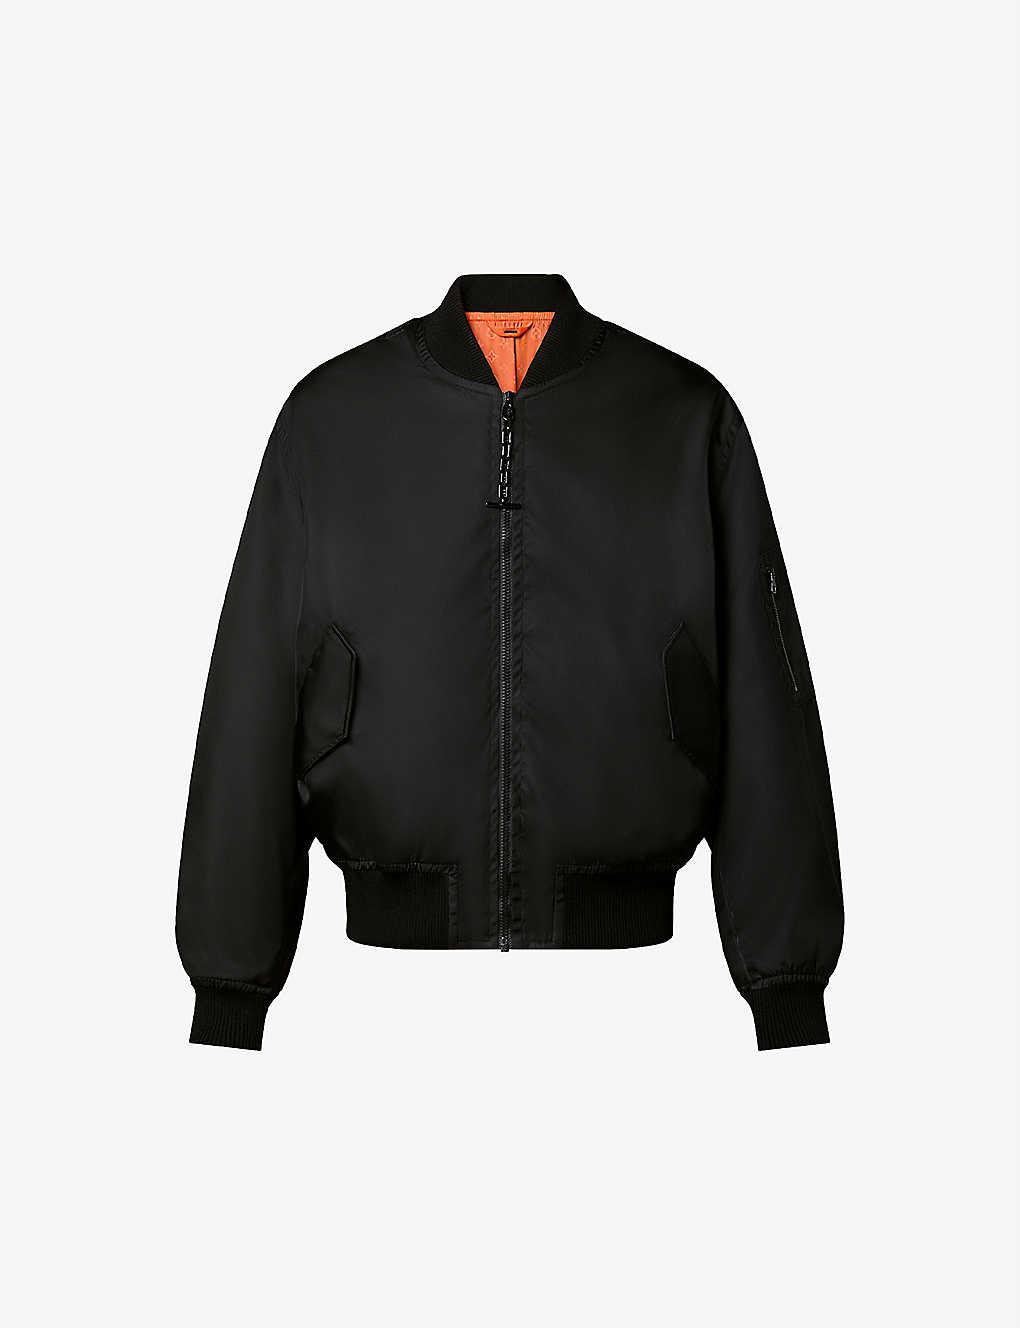 Louis Vuitton Reversible Loose-fit Woven Bomber Jacket in Black for